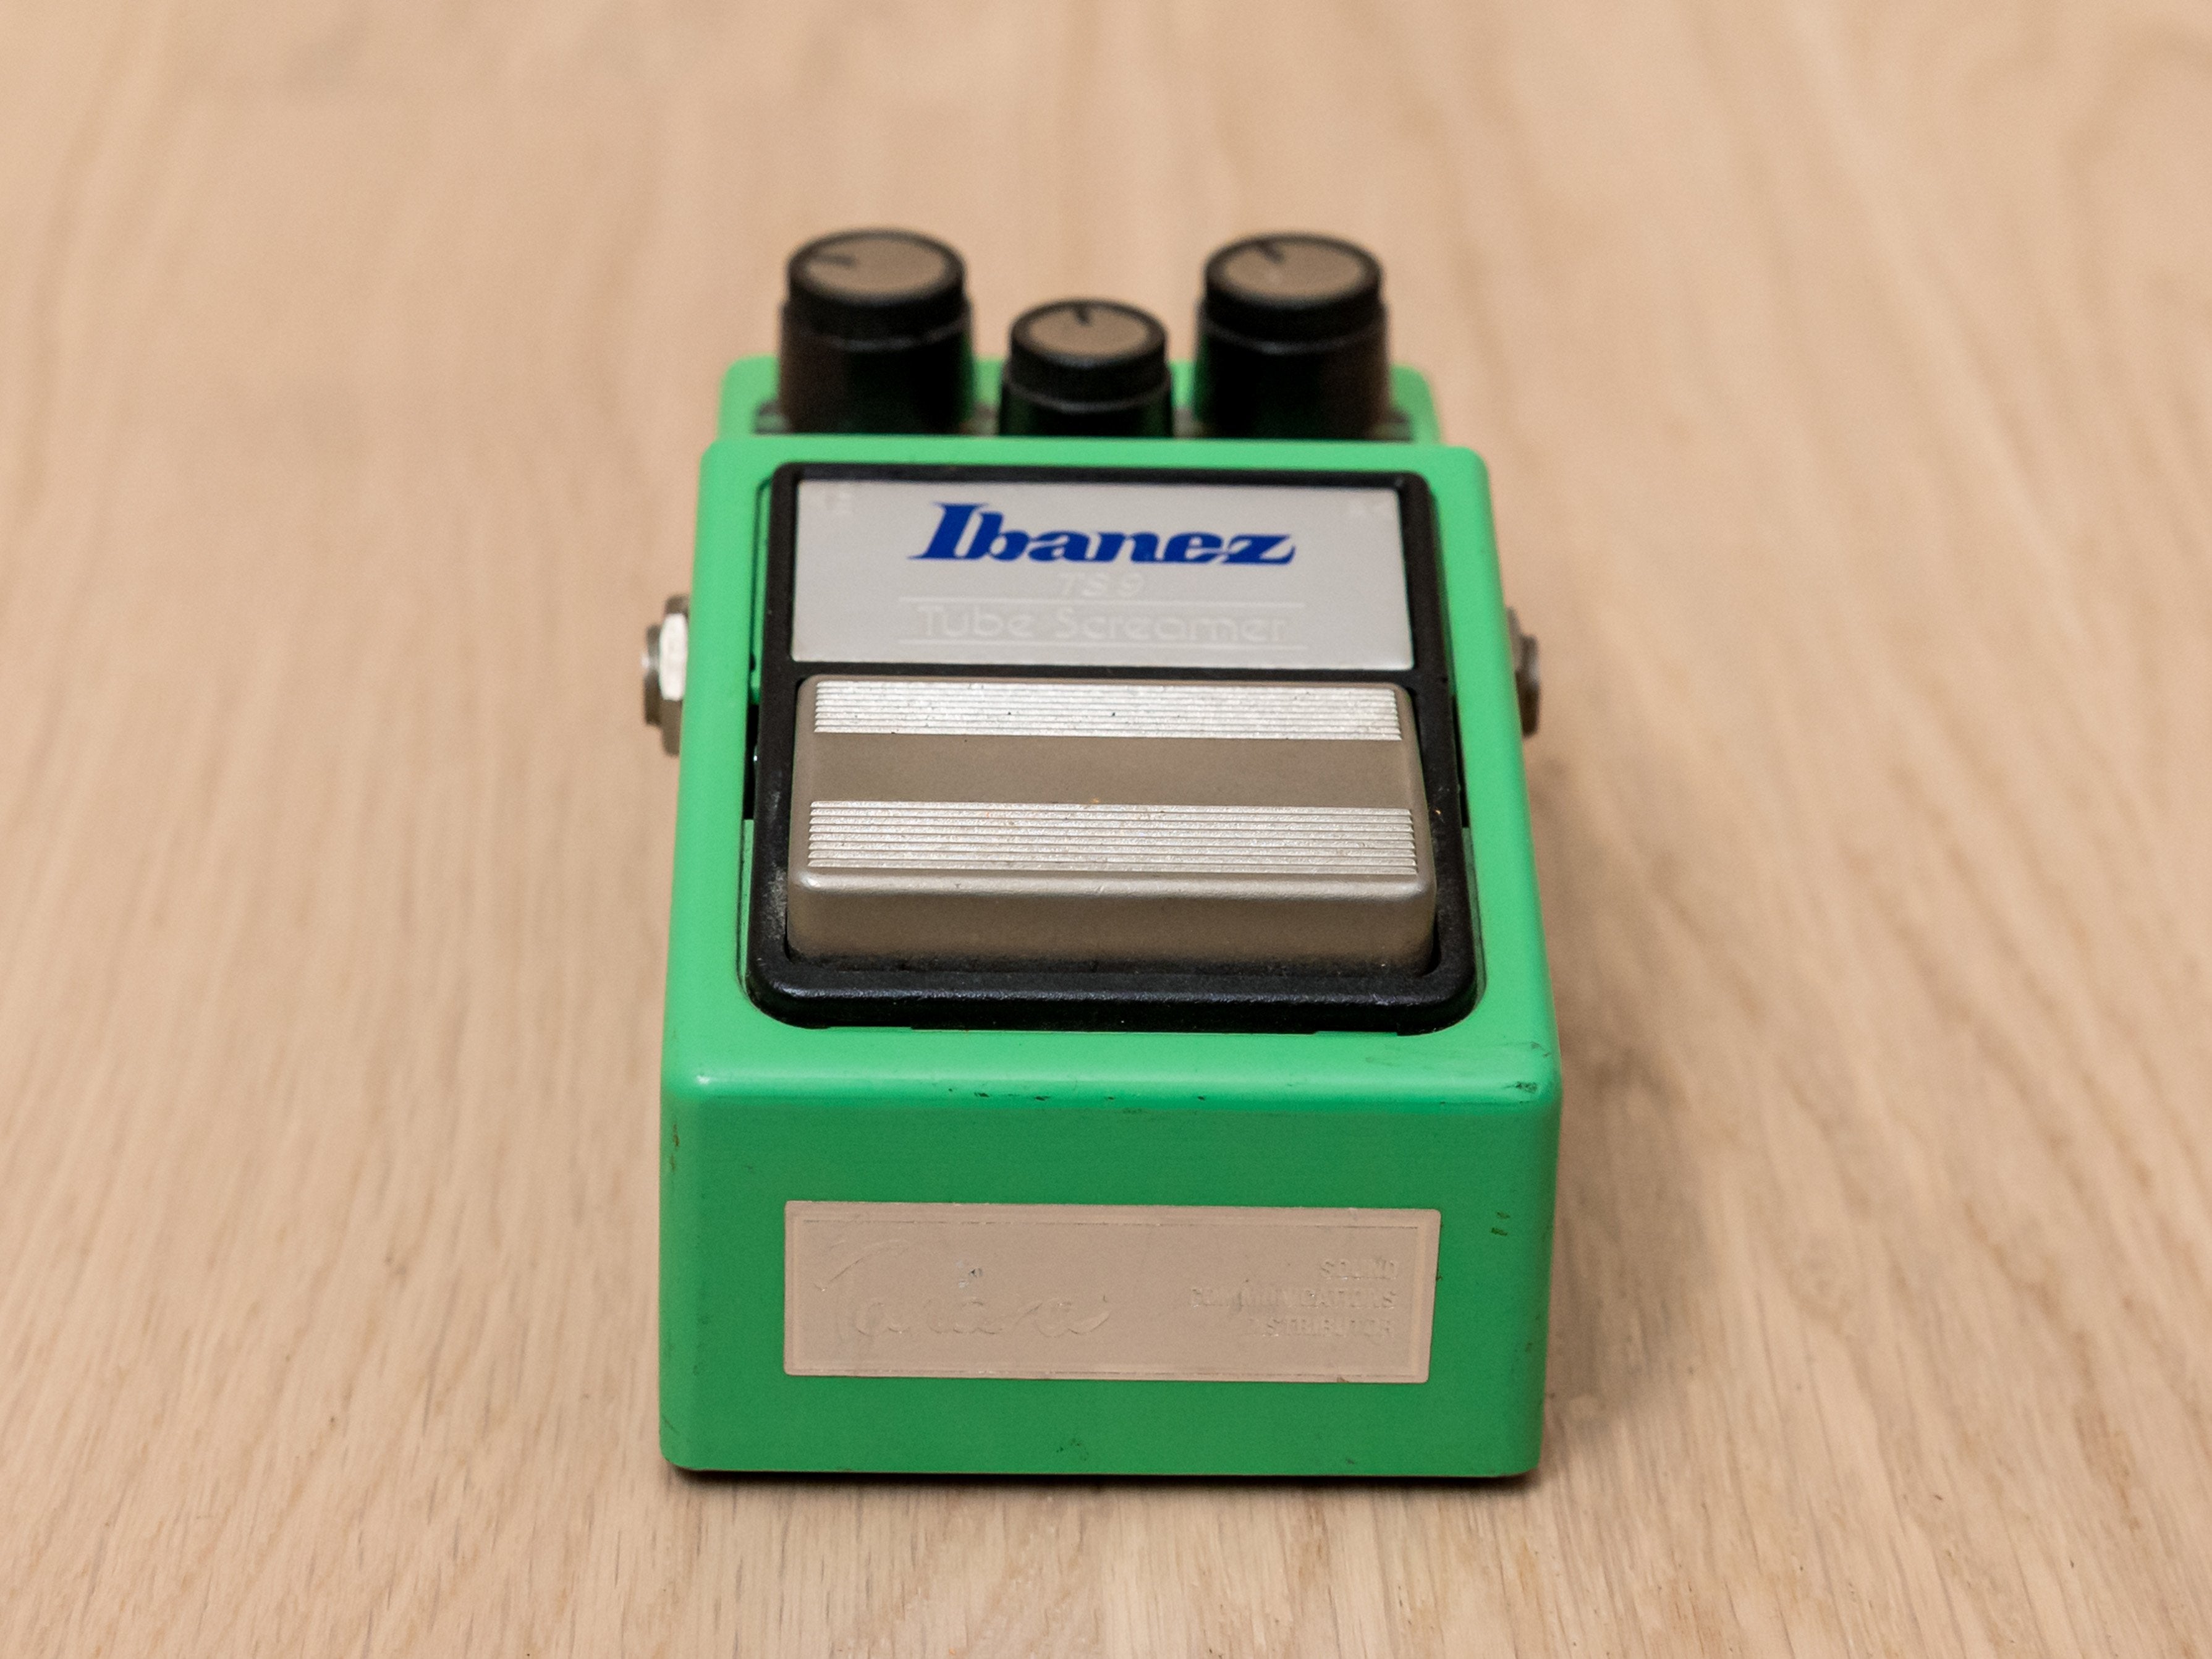 Ibanez TS9 Tube Screamer Keeley Baked Mod Overdrive Guitar Effects Pedal